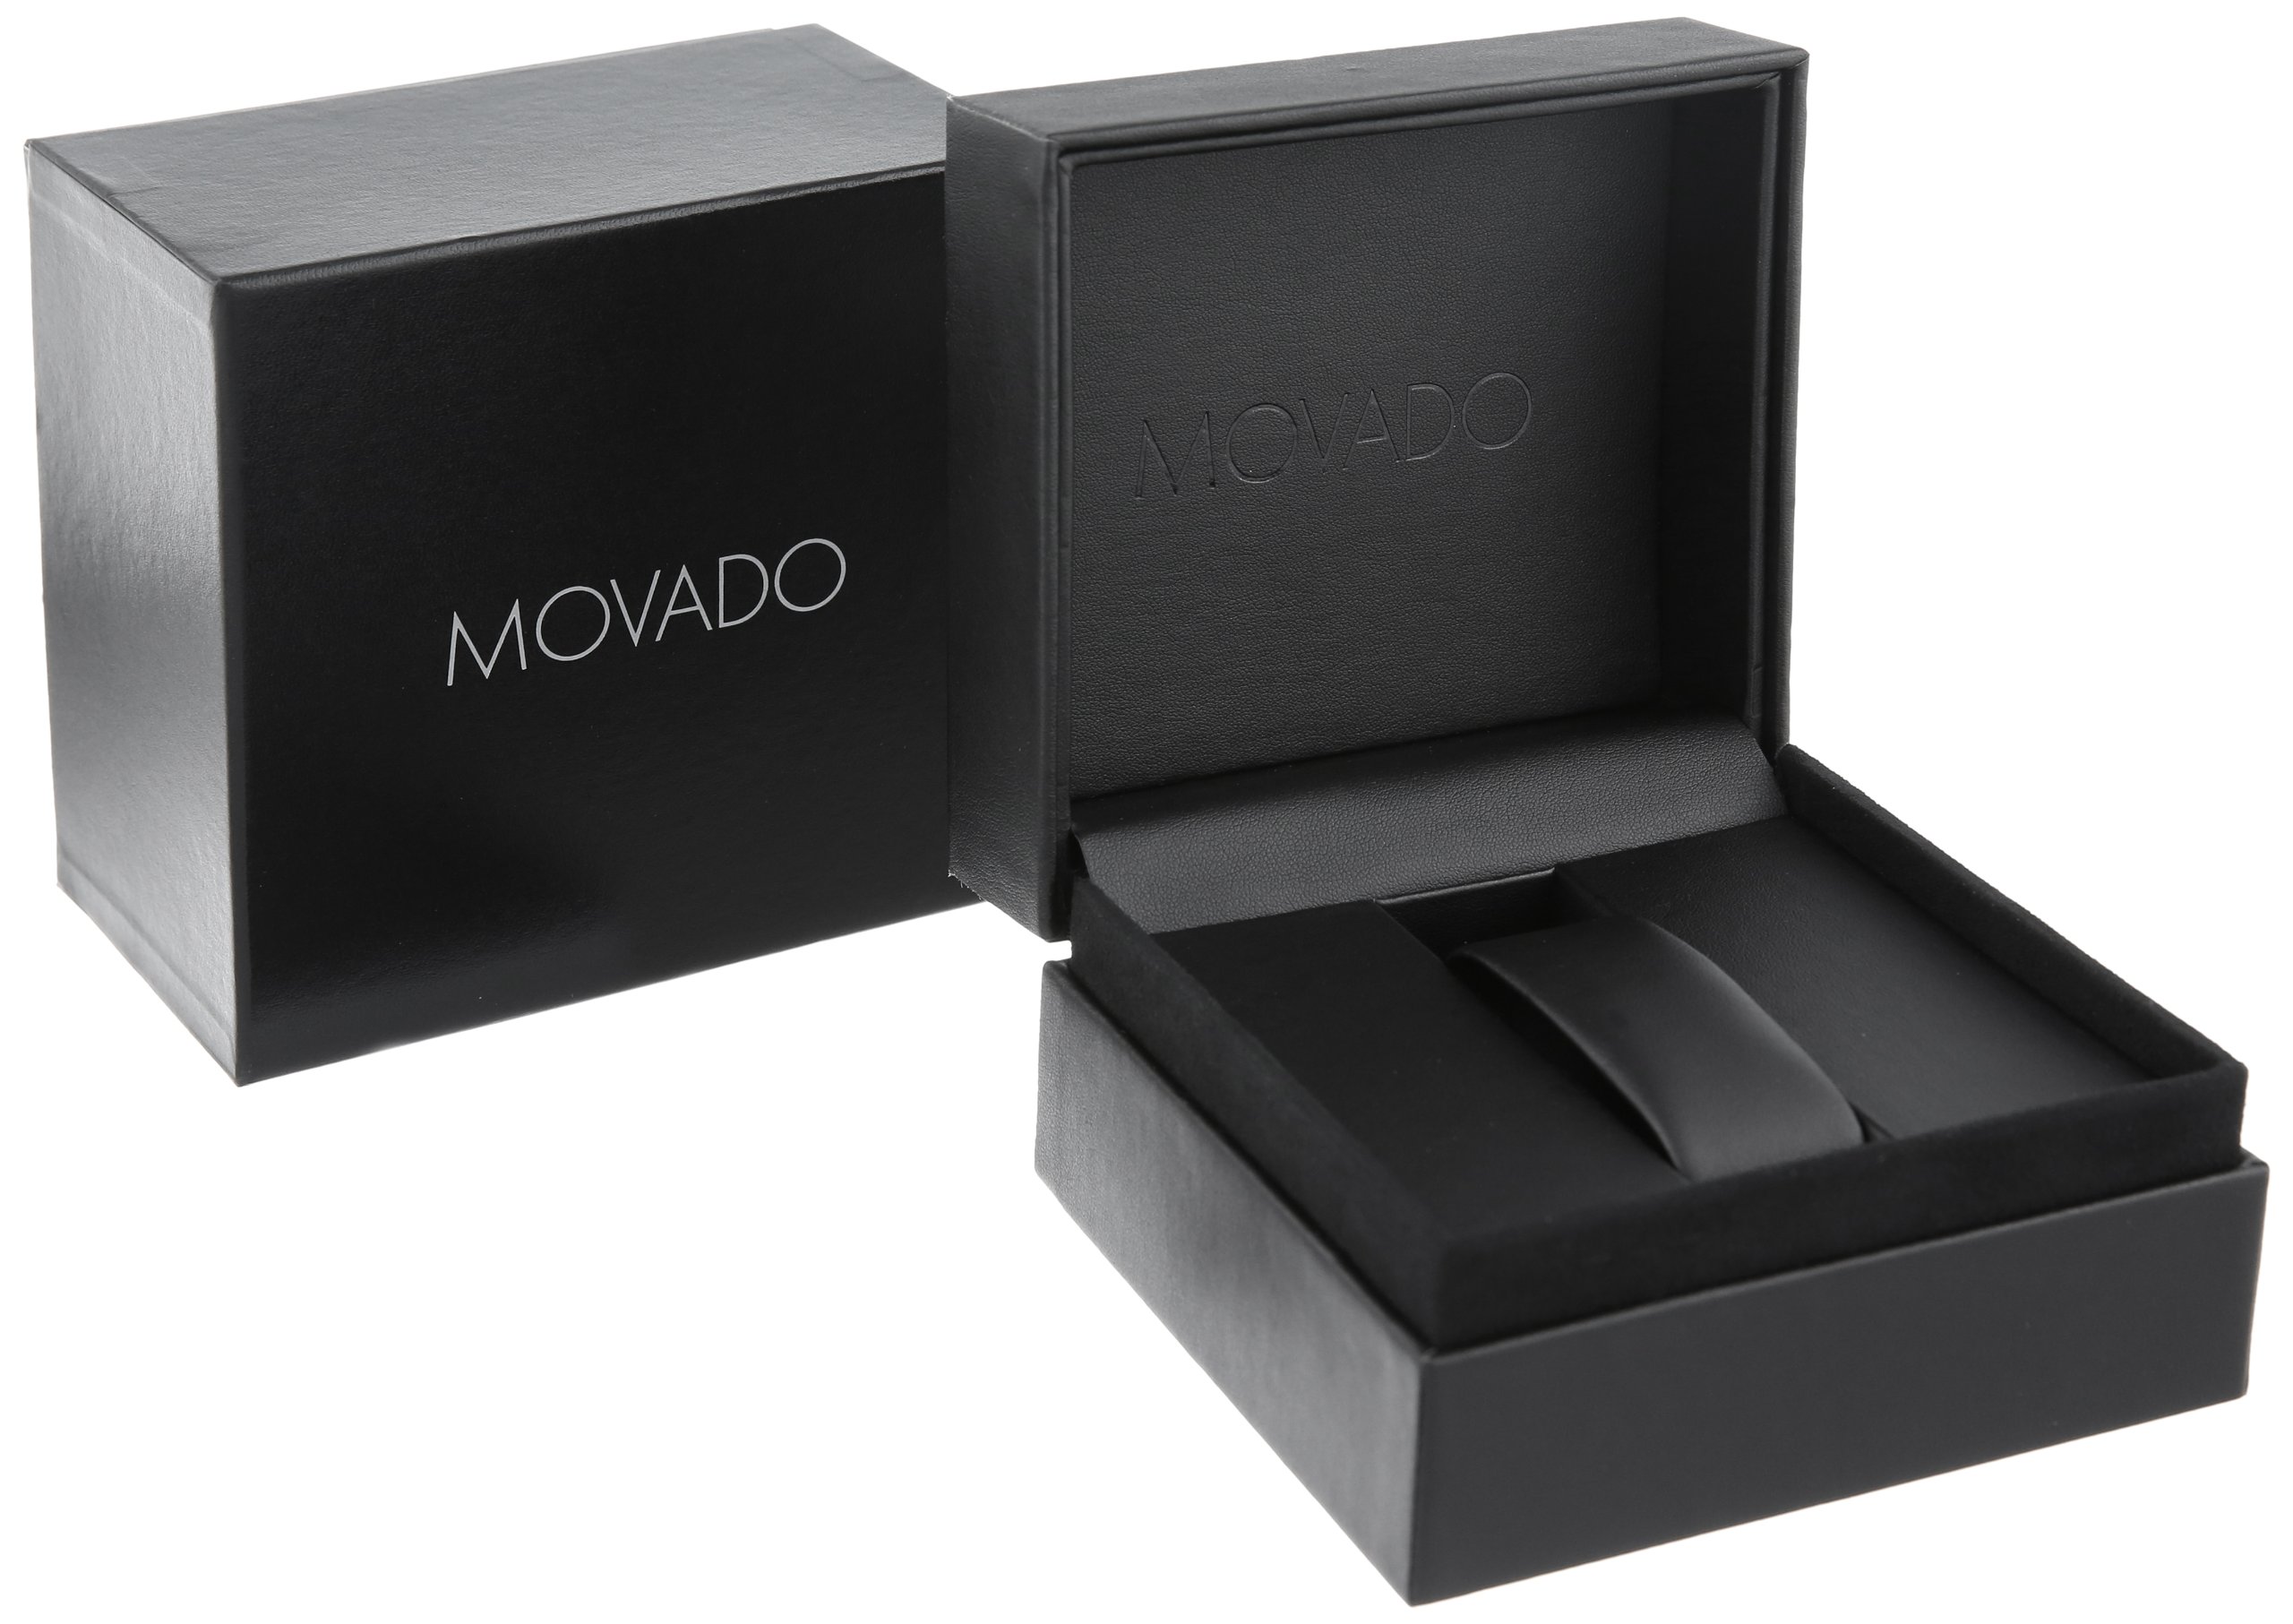 Movado Women's 0606618 Movado Lx Stainless Steel Watch